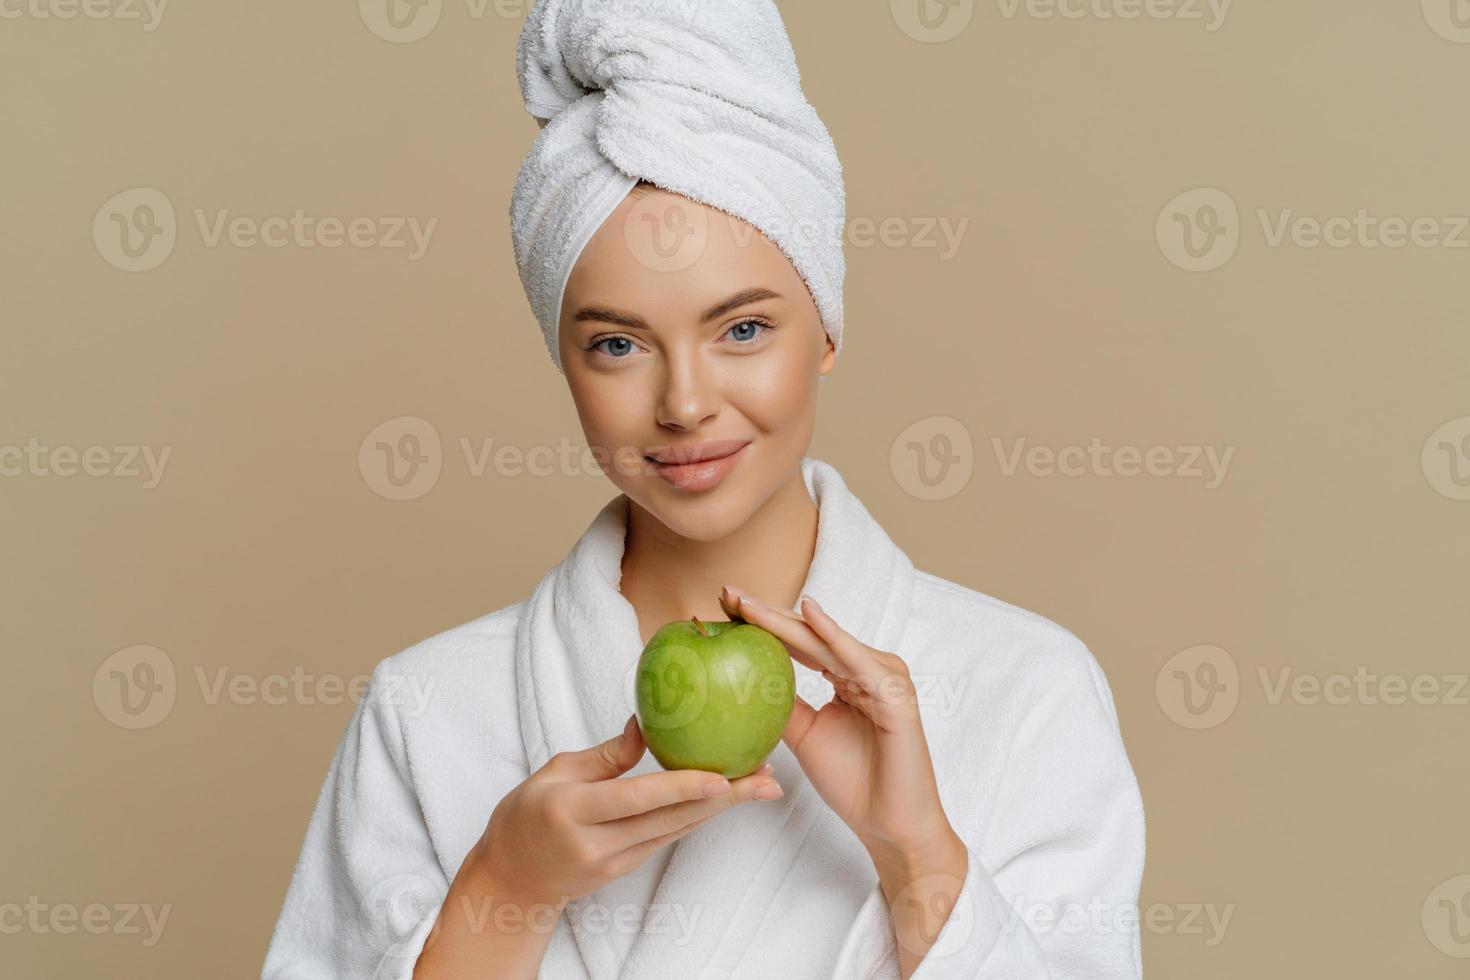 Lovely young woman has refreshed skin after taking bath dressed in dressing gown wrapped towel on head holds green apple containing much vitamins isolated over brown background. Hygiene concept photo